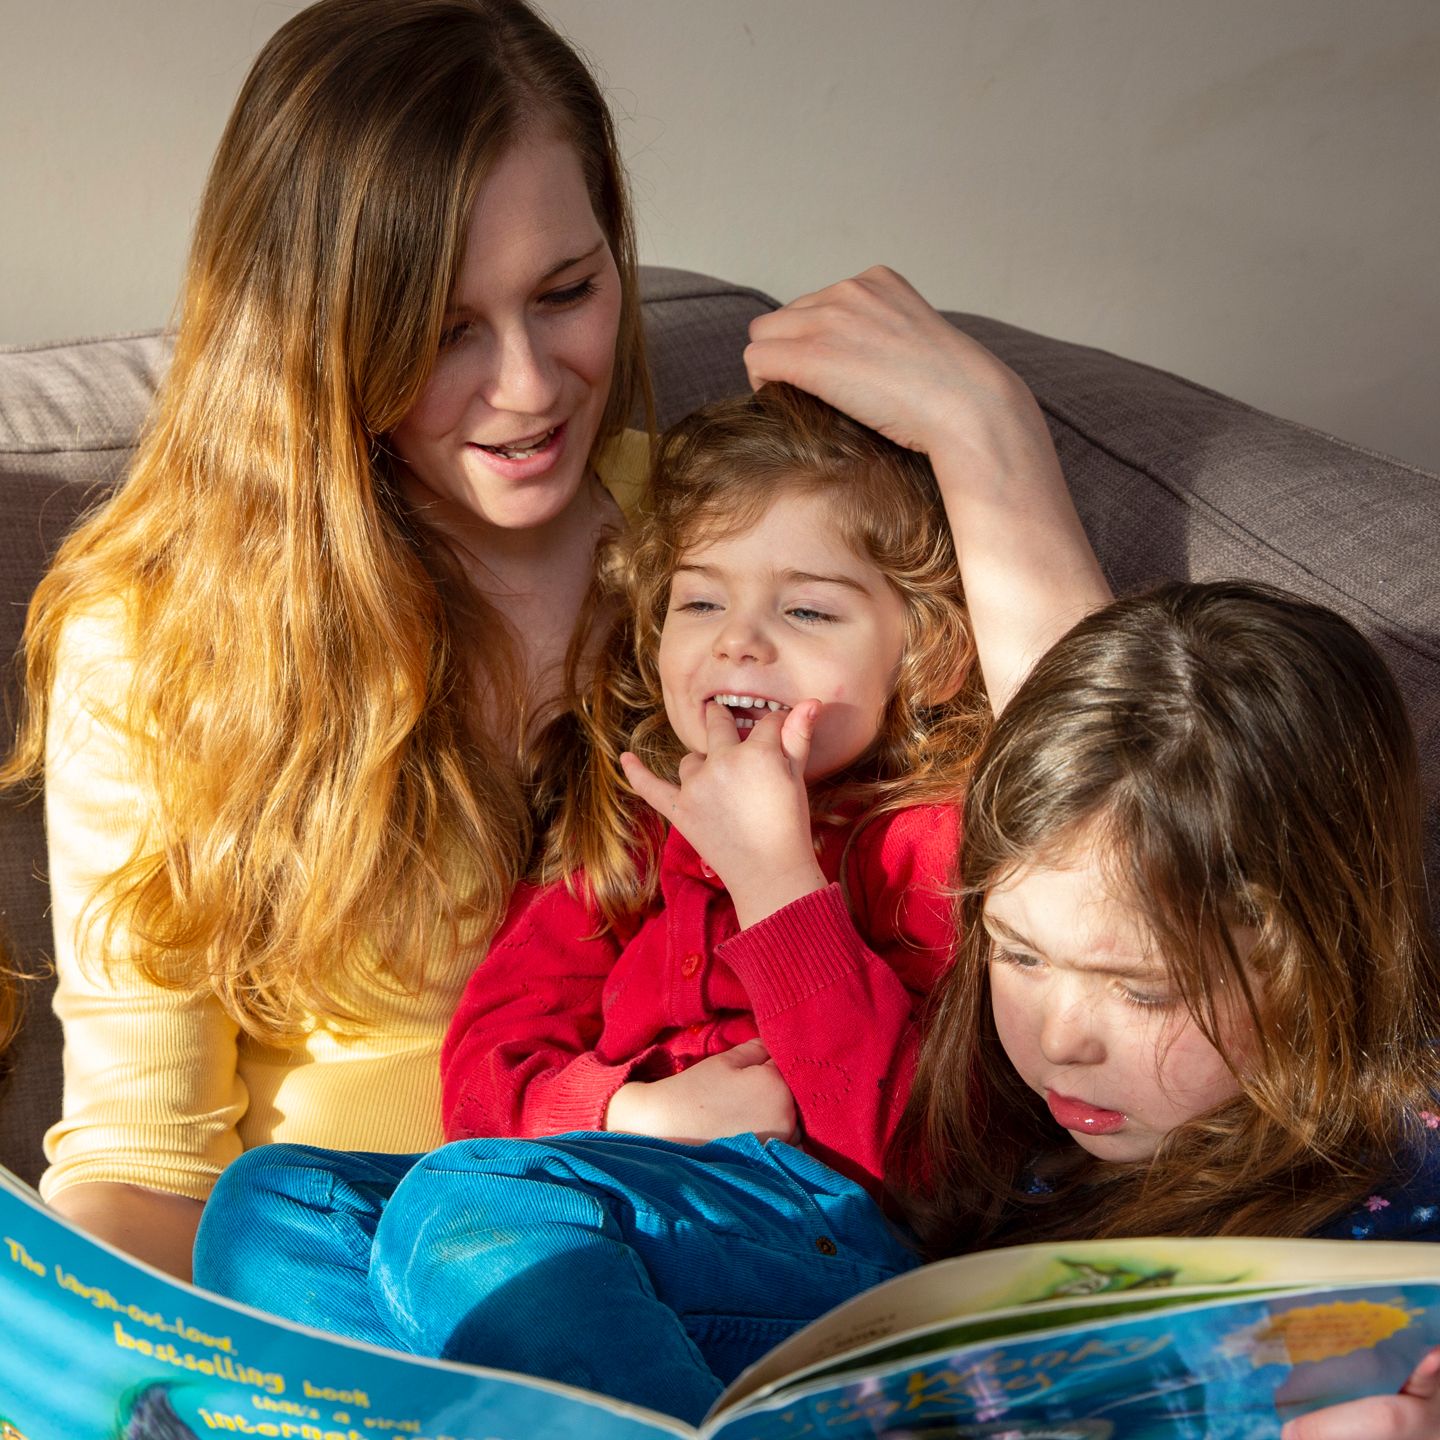  Give a Little Love - Home-Start - Mother and daughters reading a childrens book